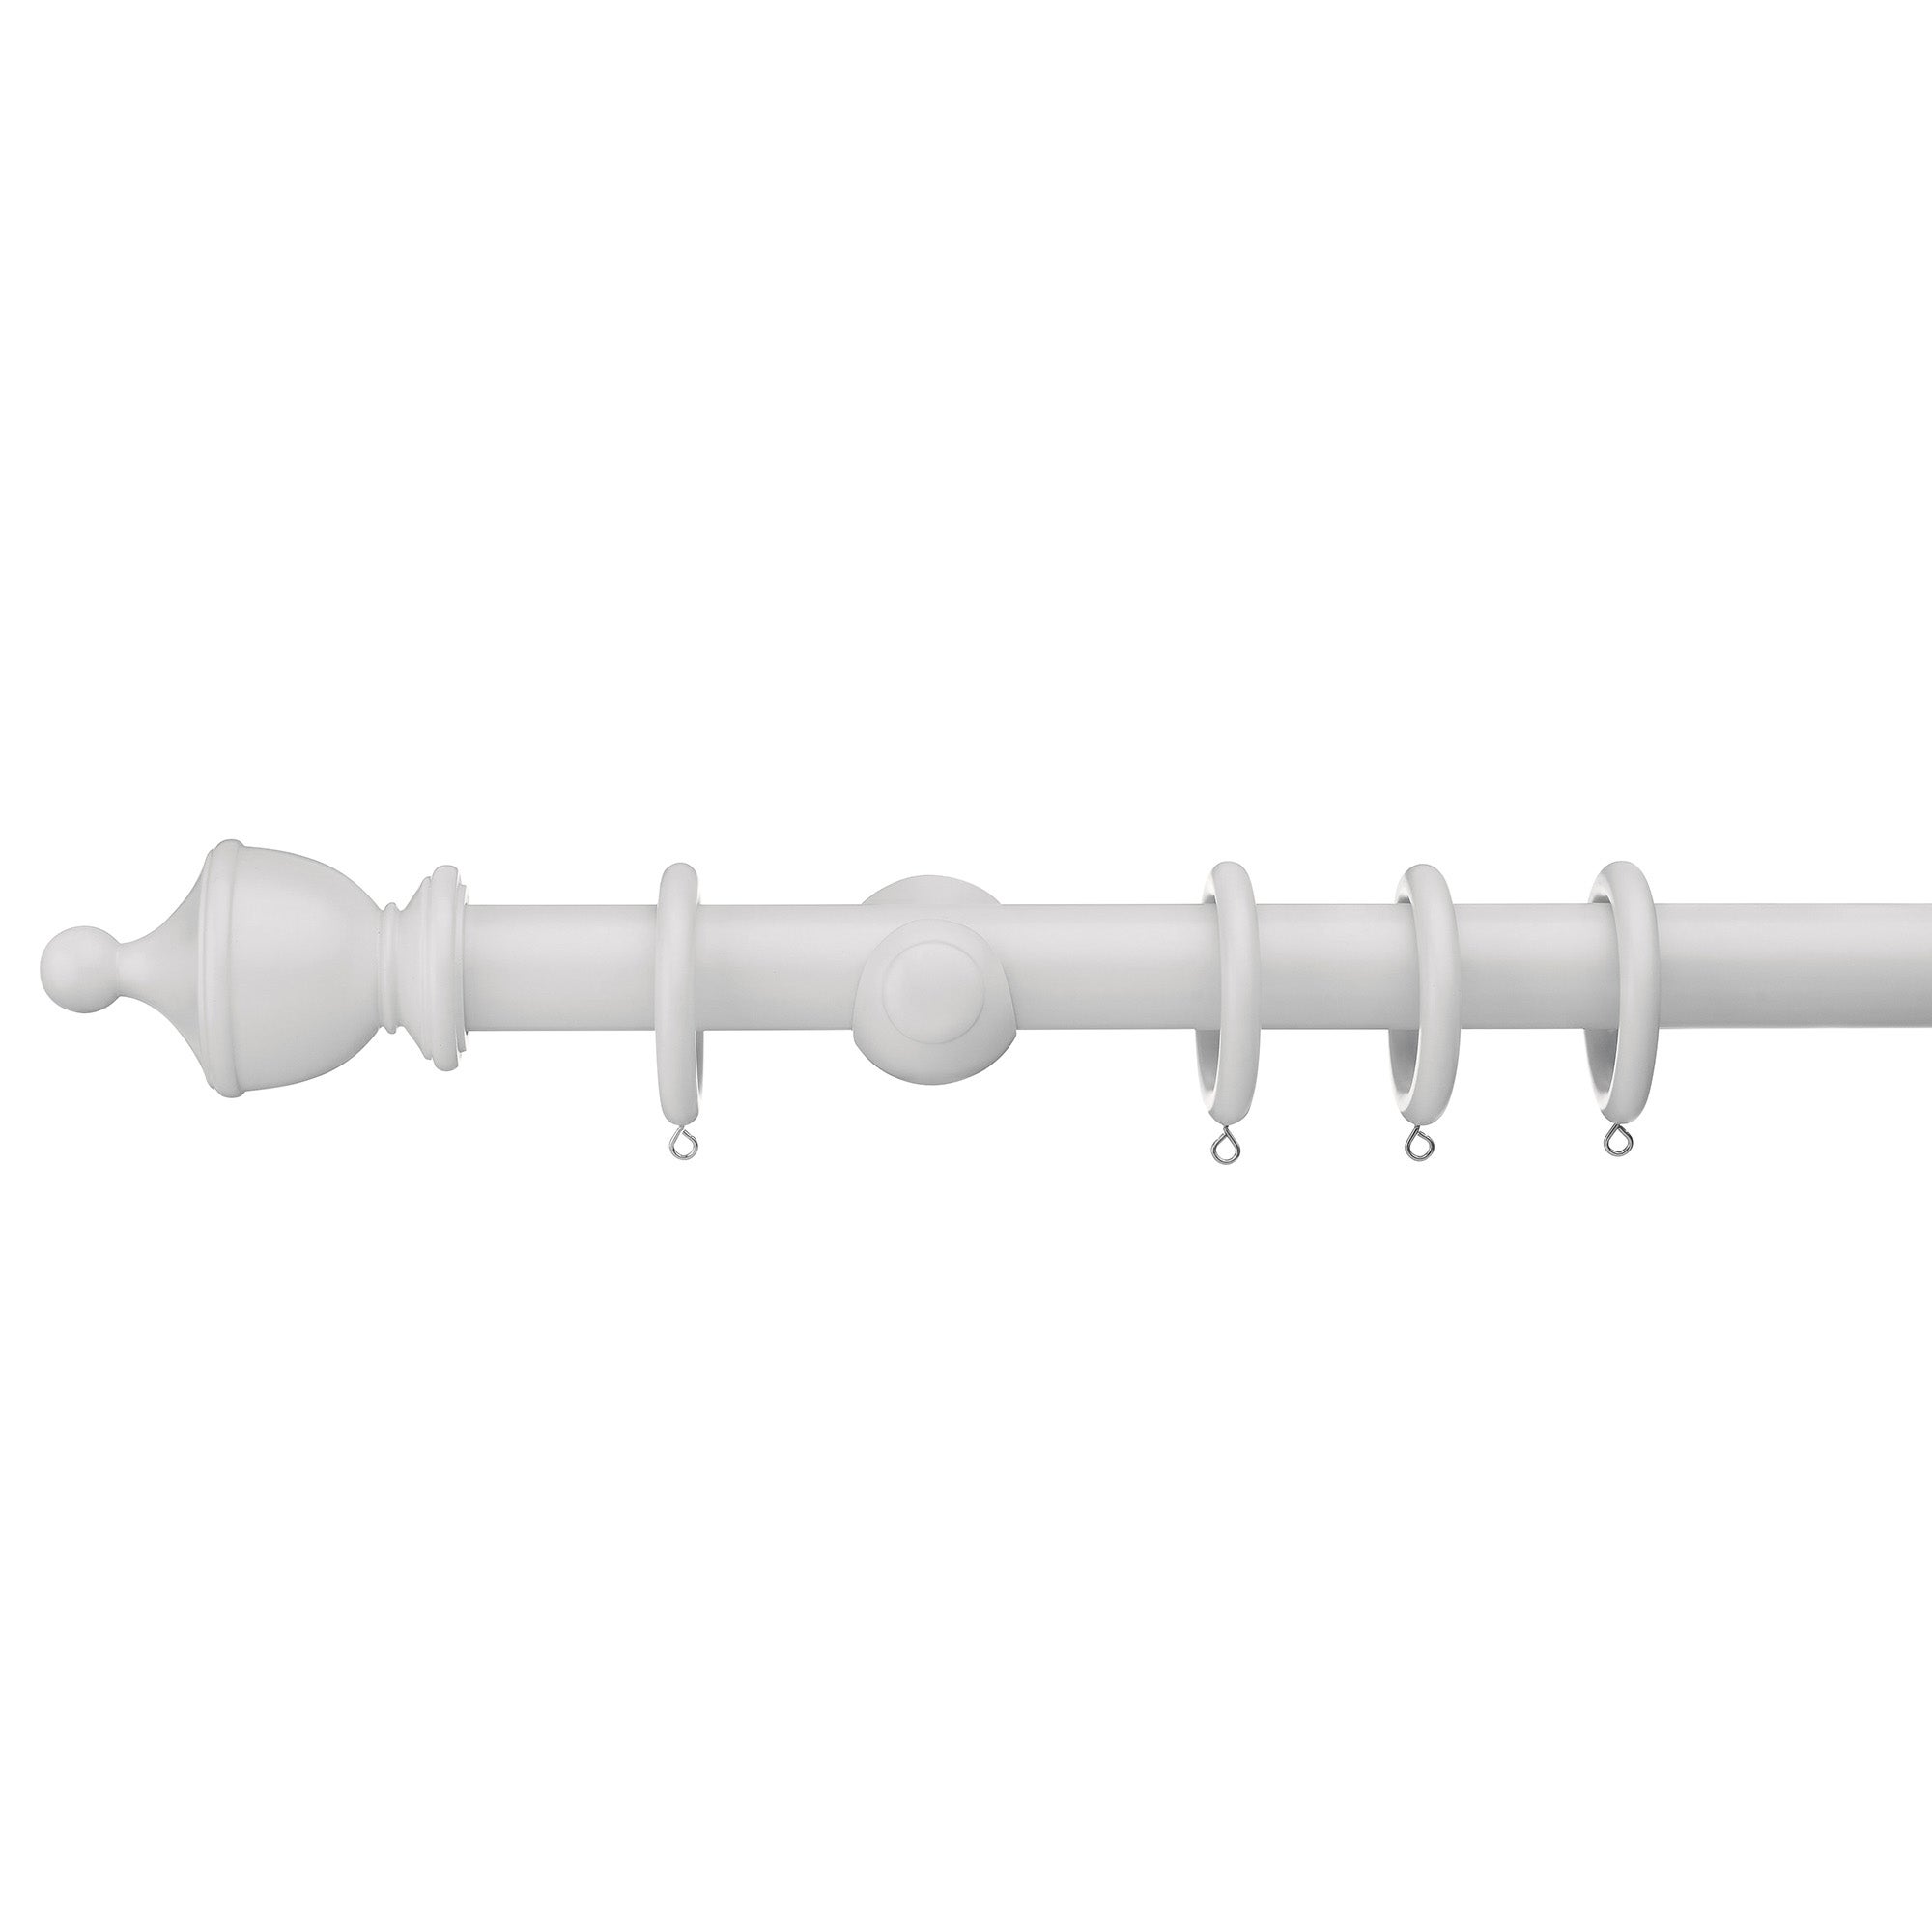 Sherwood Urn Finial Painted Wooden Curtain Pole White